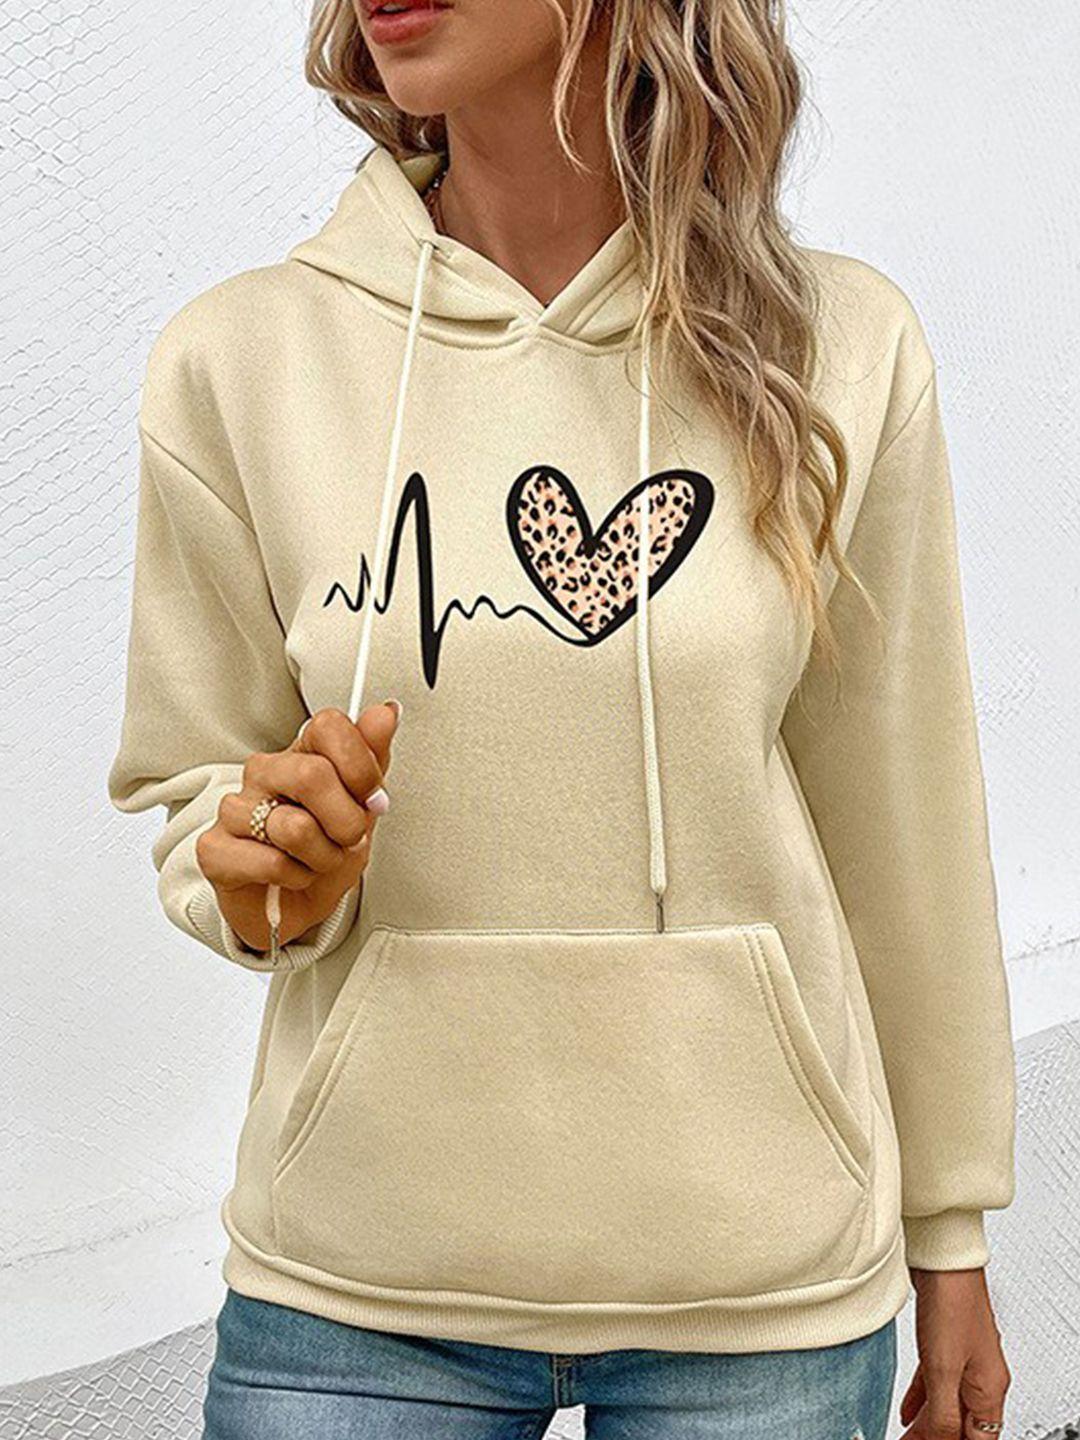 stylecast beige graphic printed hooded pullover